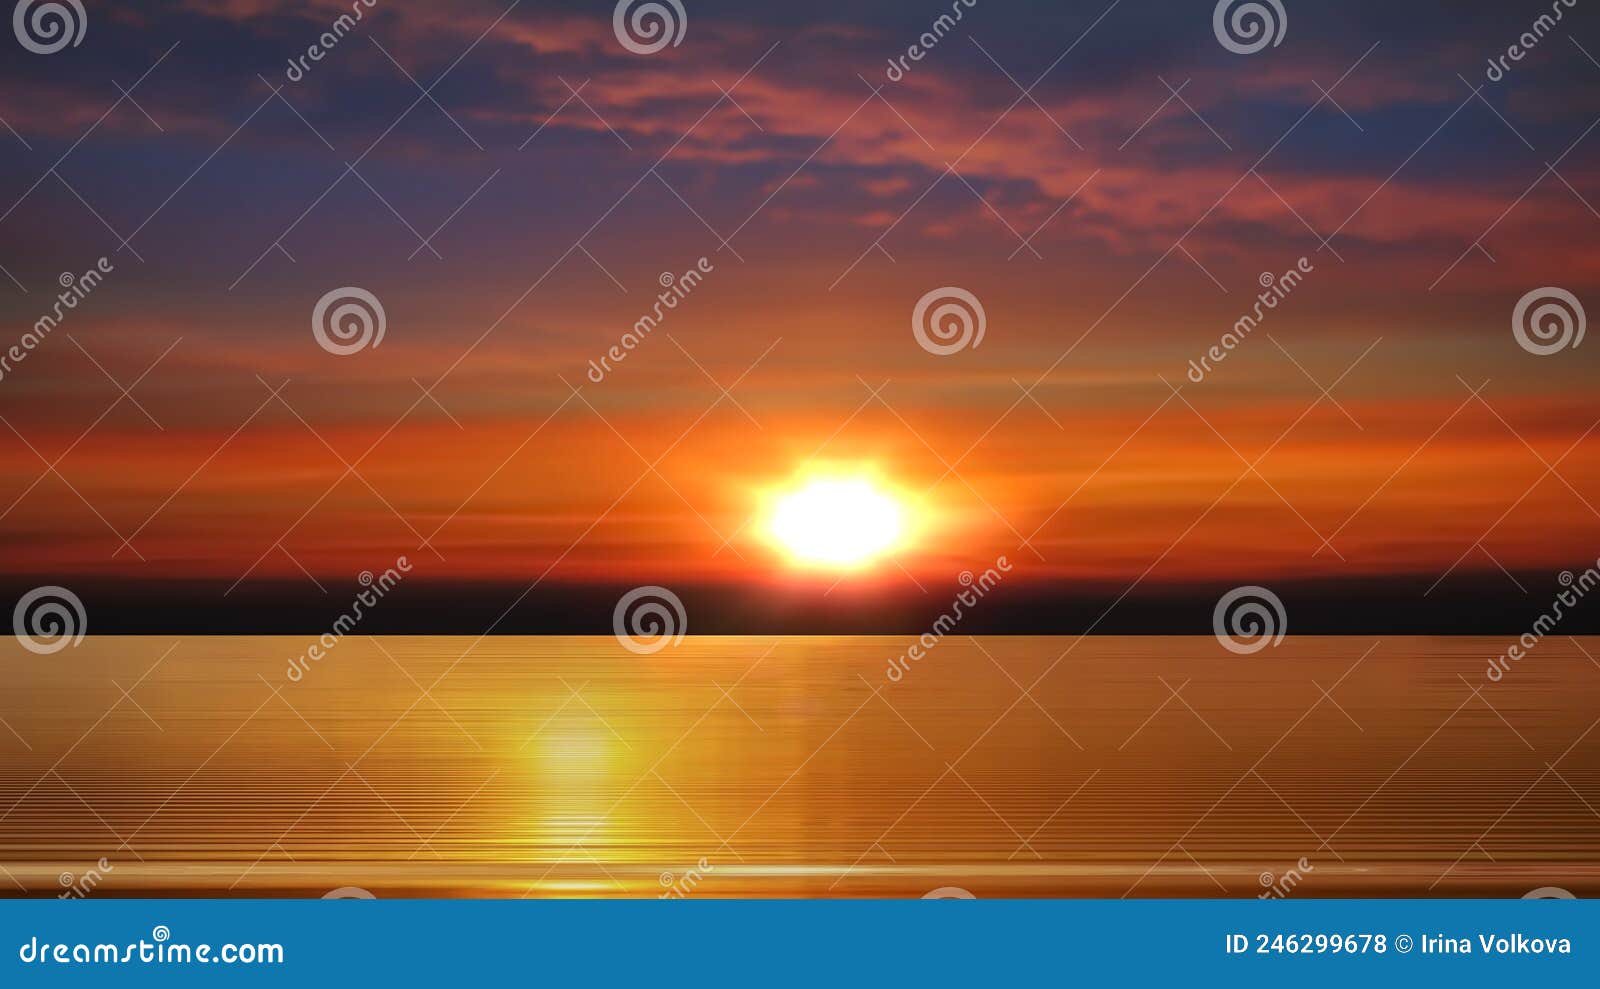 sunset dramatic clouds  on sky pink orange yellow blue reflection on sea water  natire landscape